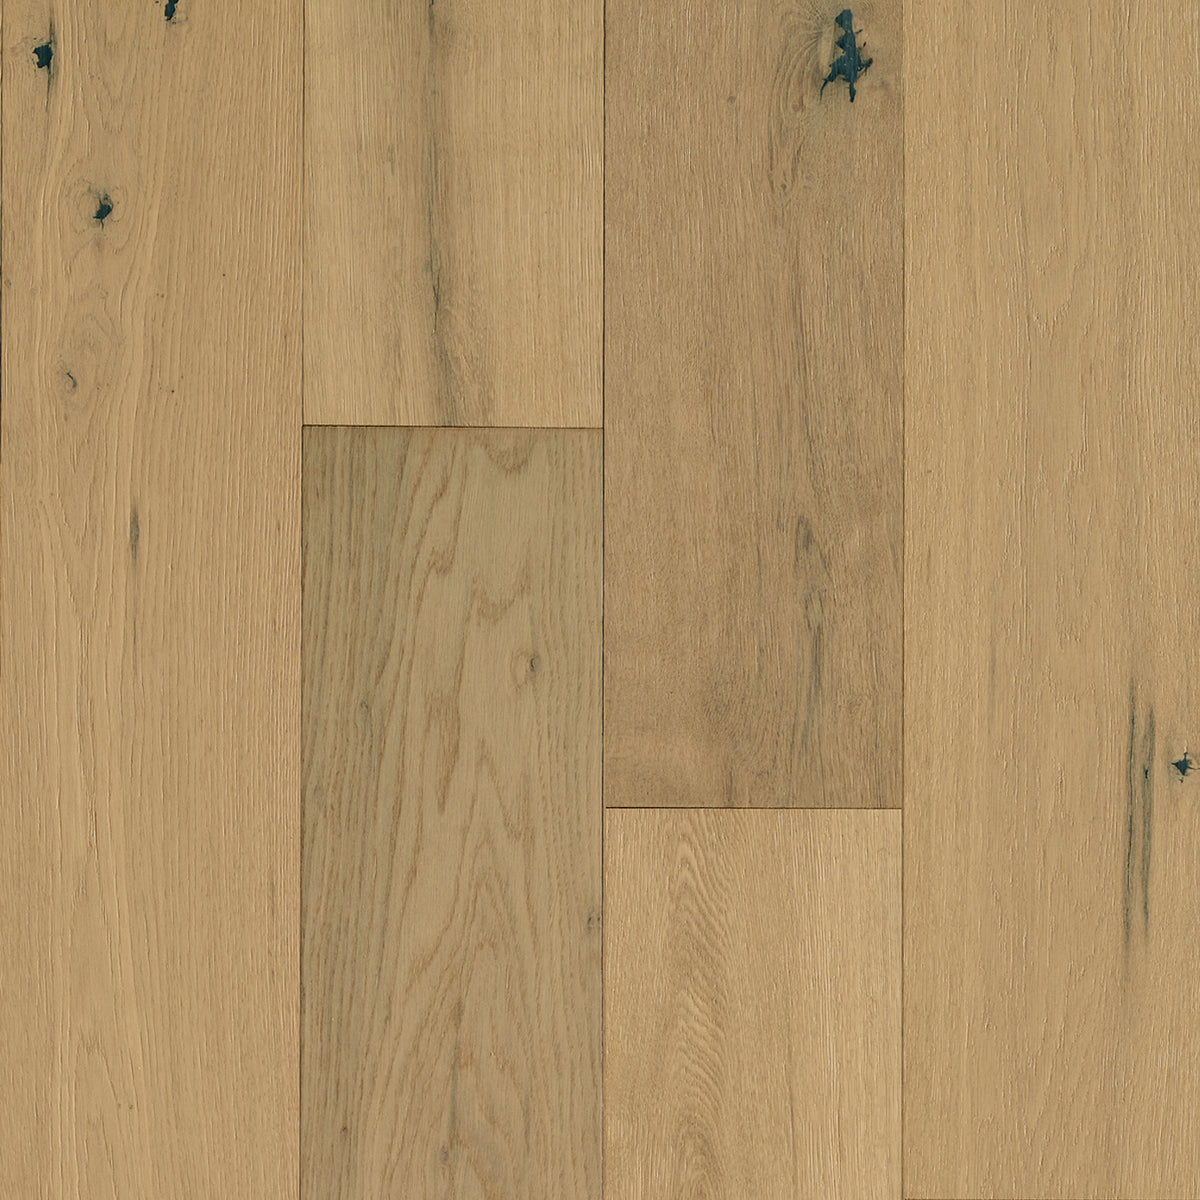 Bruce - Brushed Impressions Silver Collection - 6.5 in. Oak Hardwood - Warm Forest